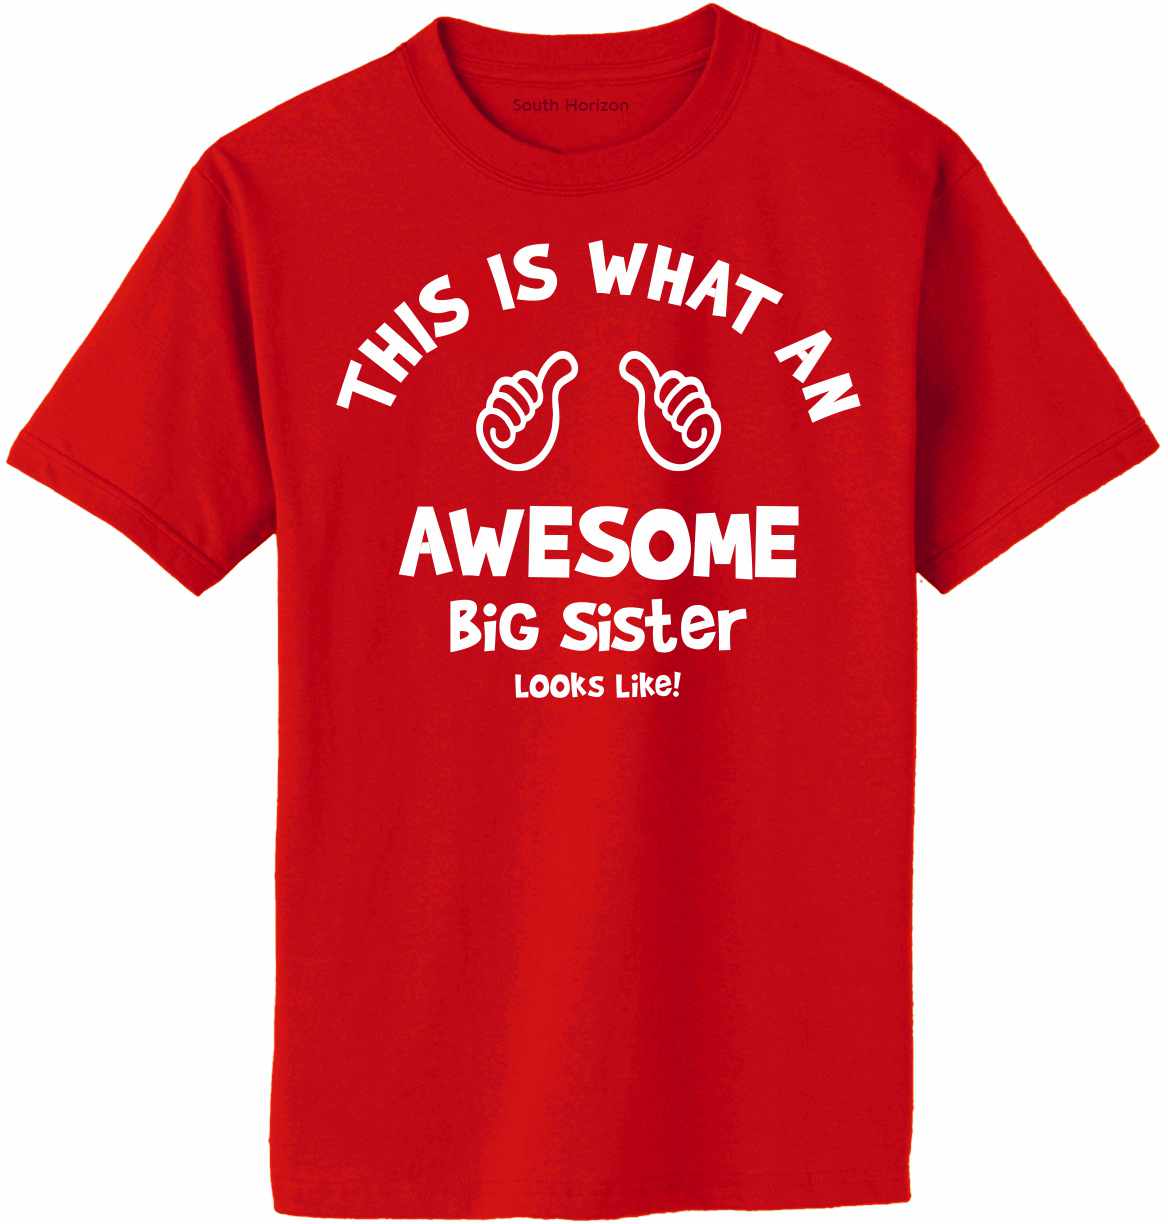 This is What an AWESOME BIG SISTER Looks Like Adult T-Shirt (#969-1)